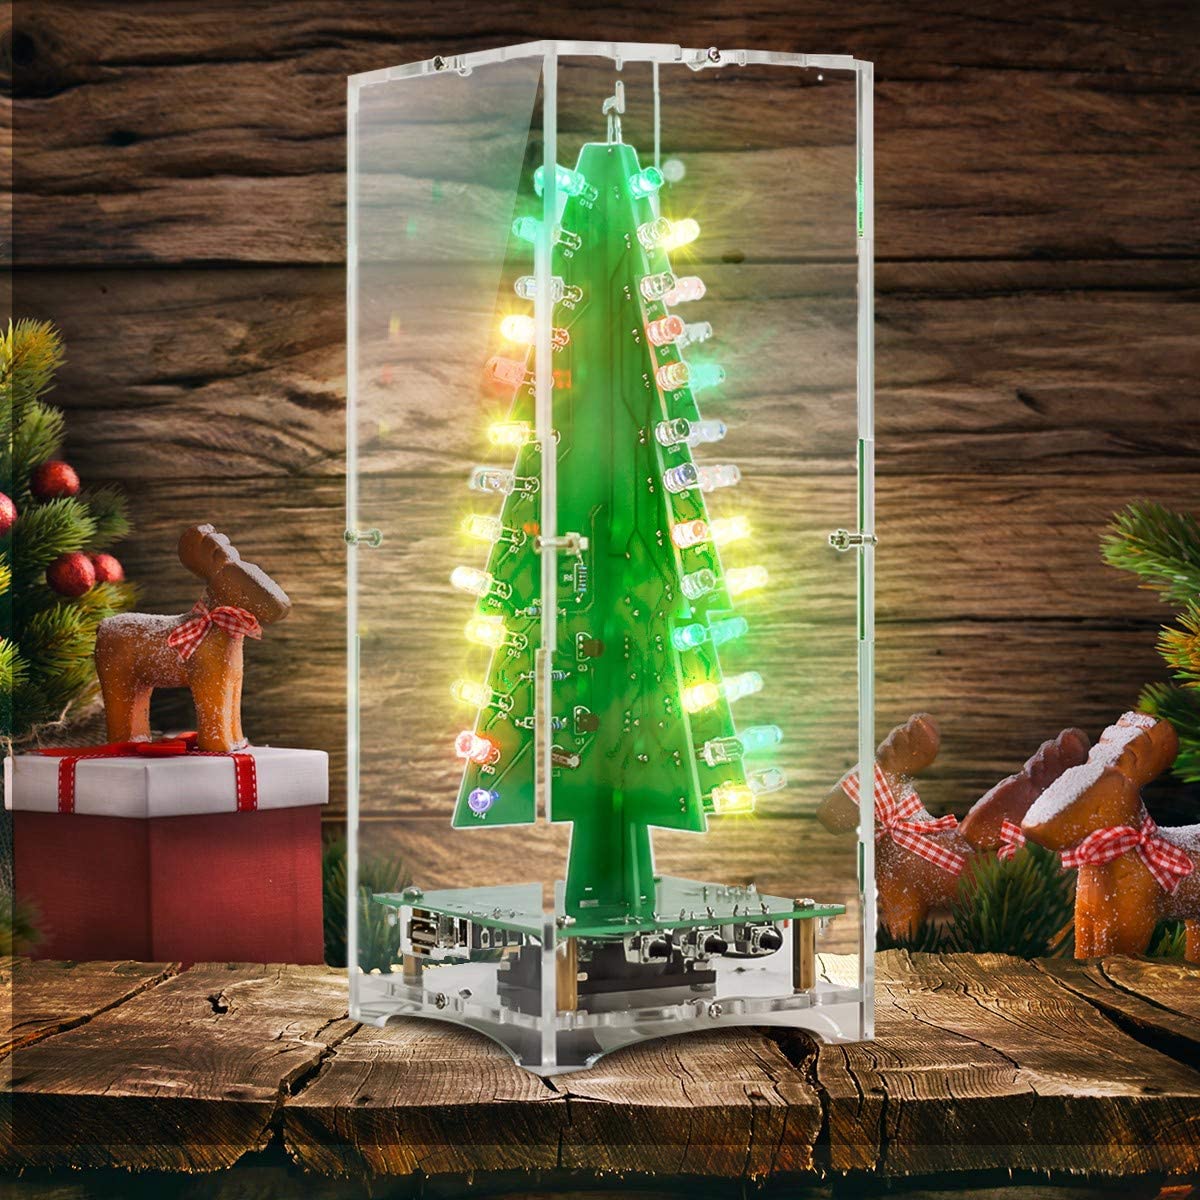 Details about   DIY Colorful LED Light Chirstmas Tree With 8Kind Music Electronic Kit Gift R4Q6 